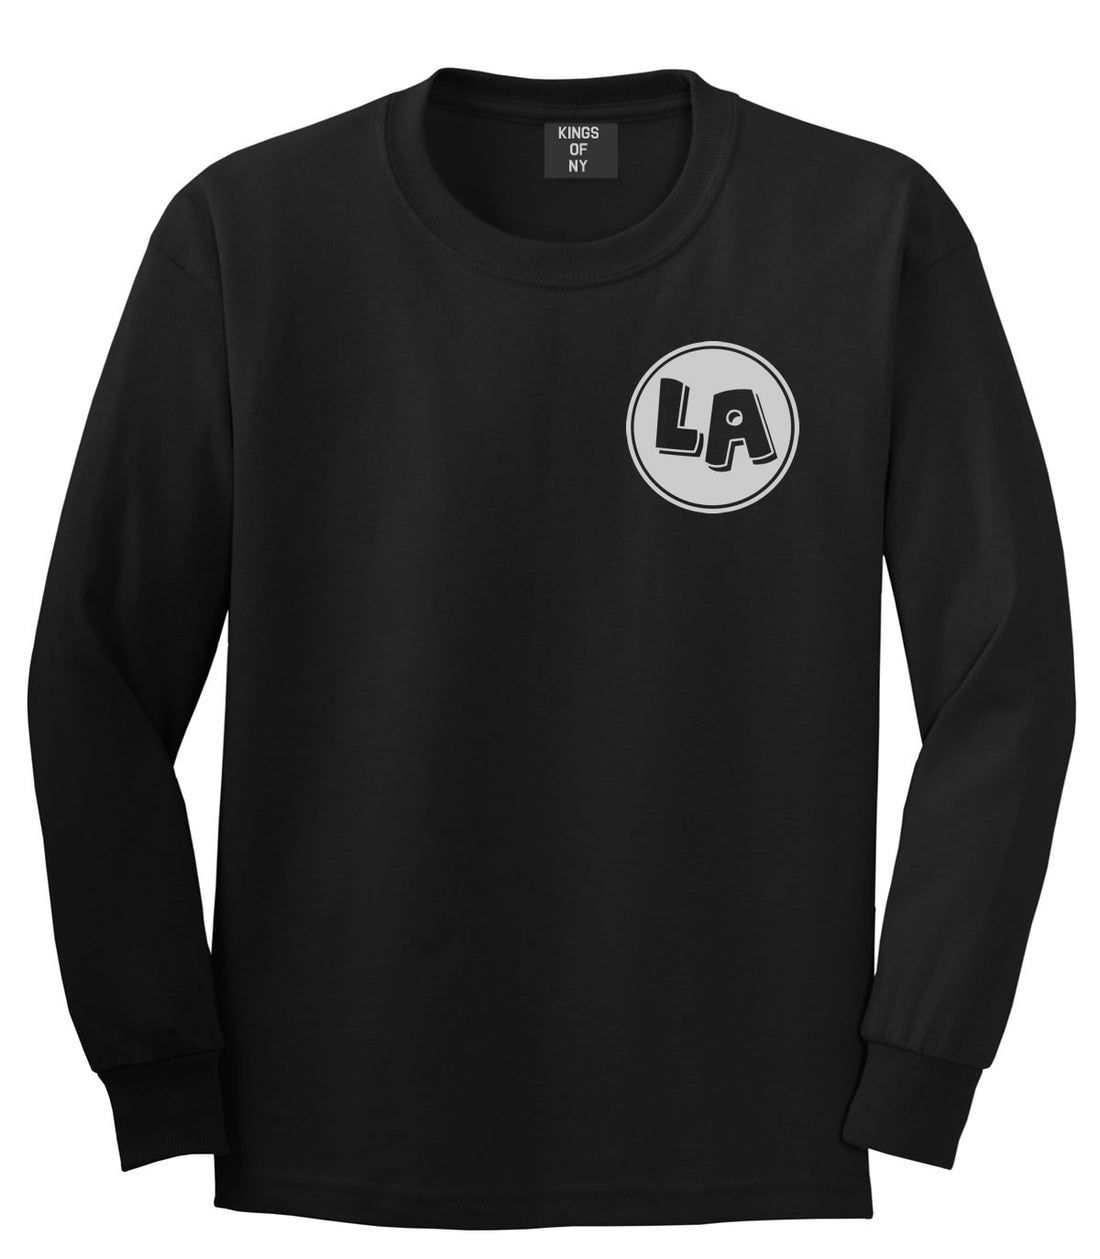 LA Circle Chest Los Angeles Long Sleeve T-Shirt in Black By Kings Of NY